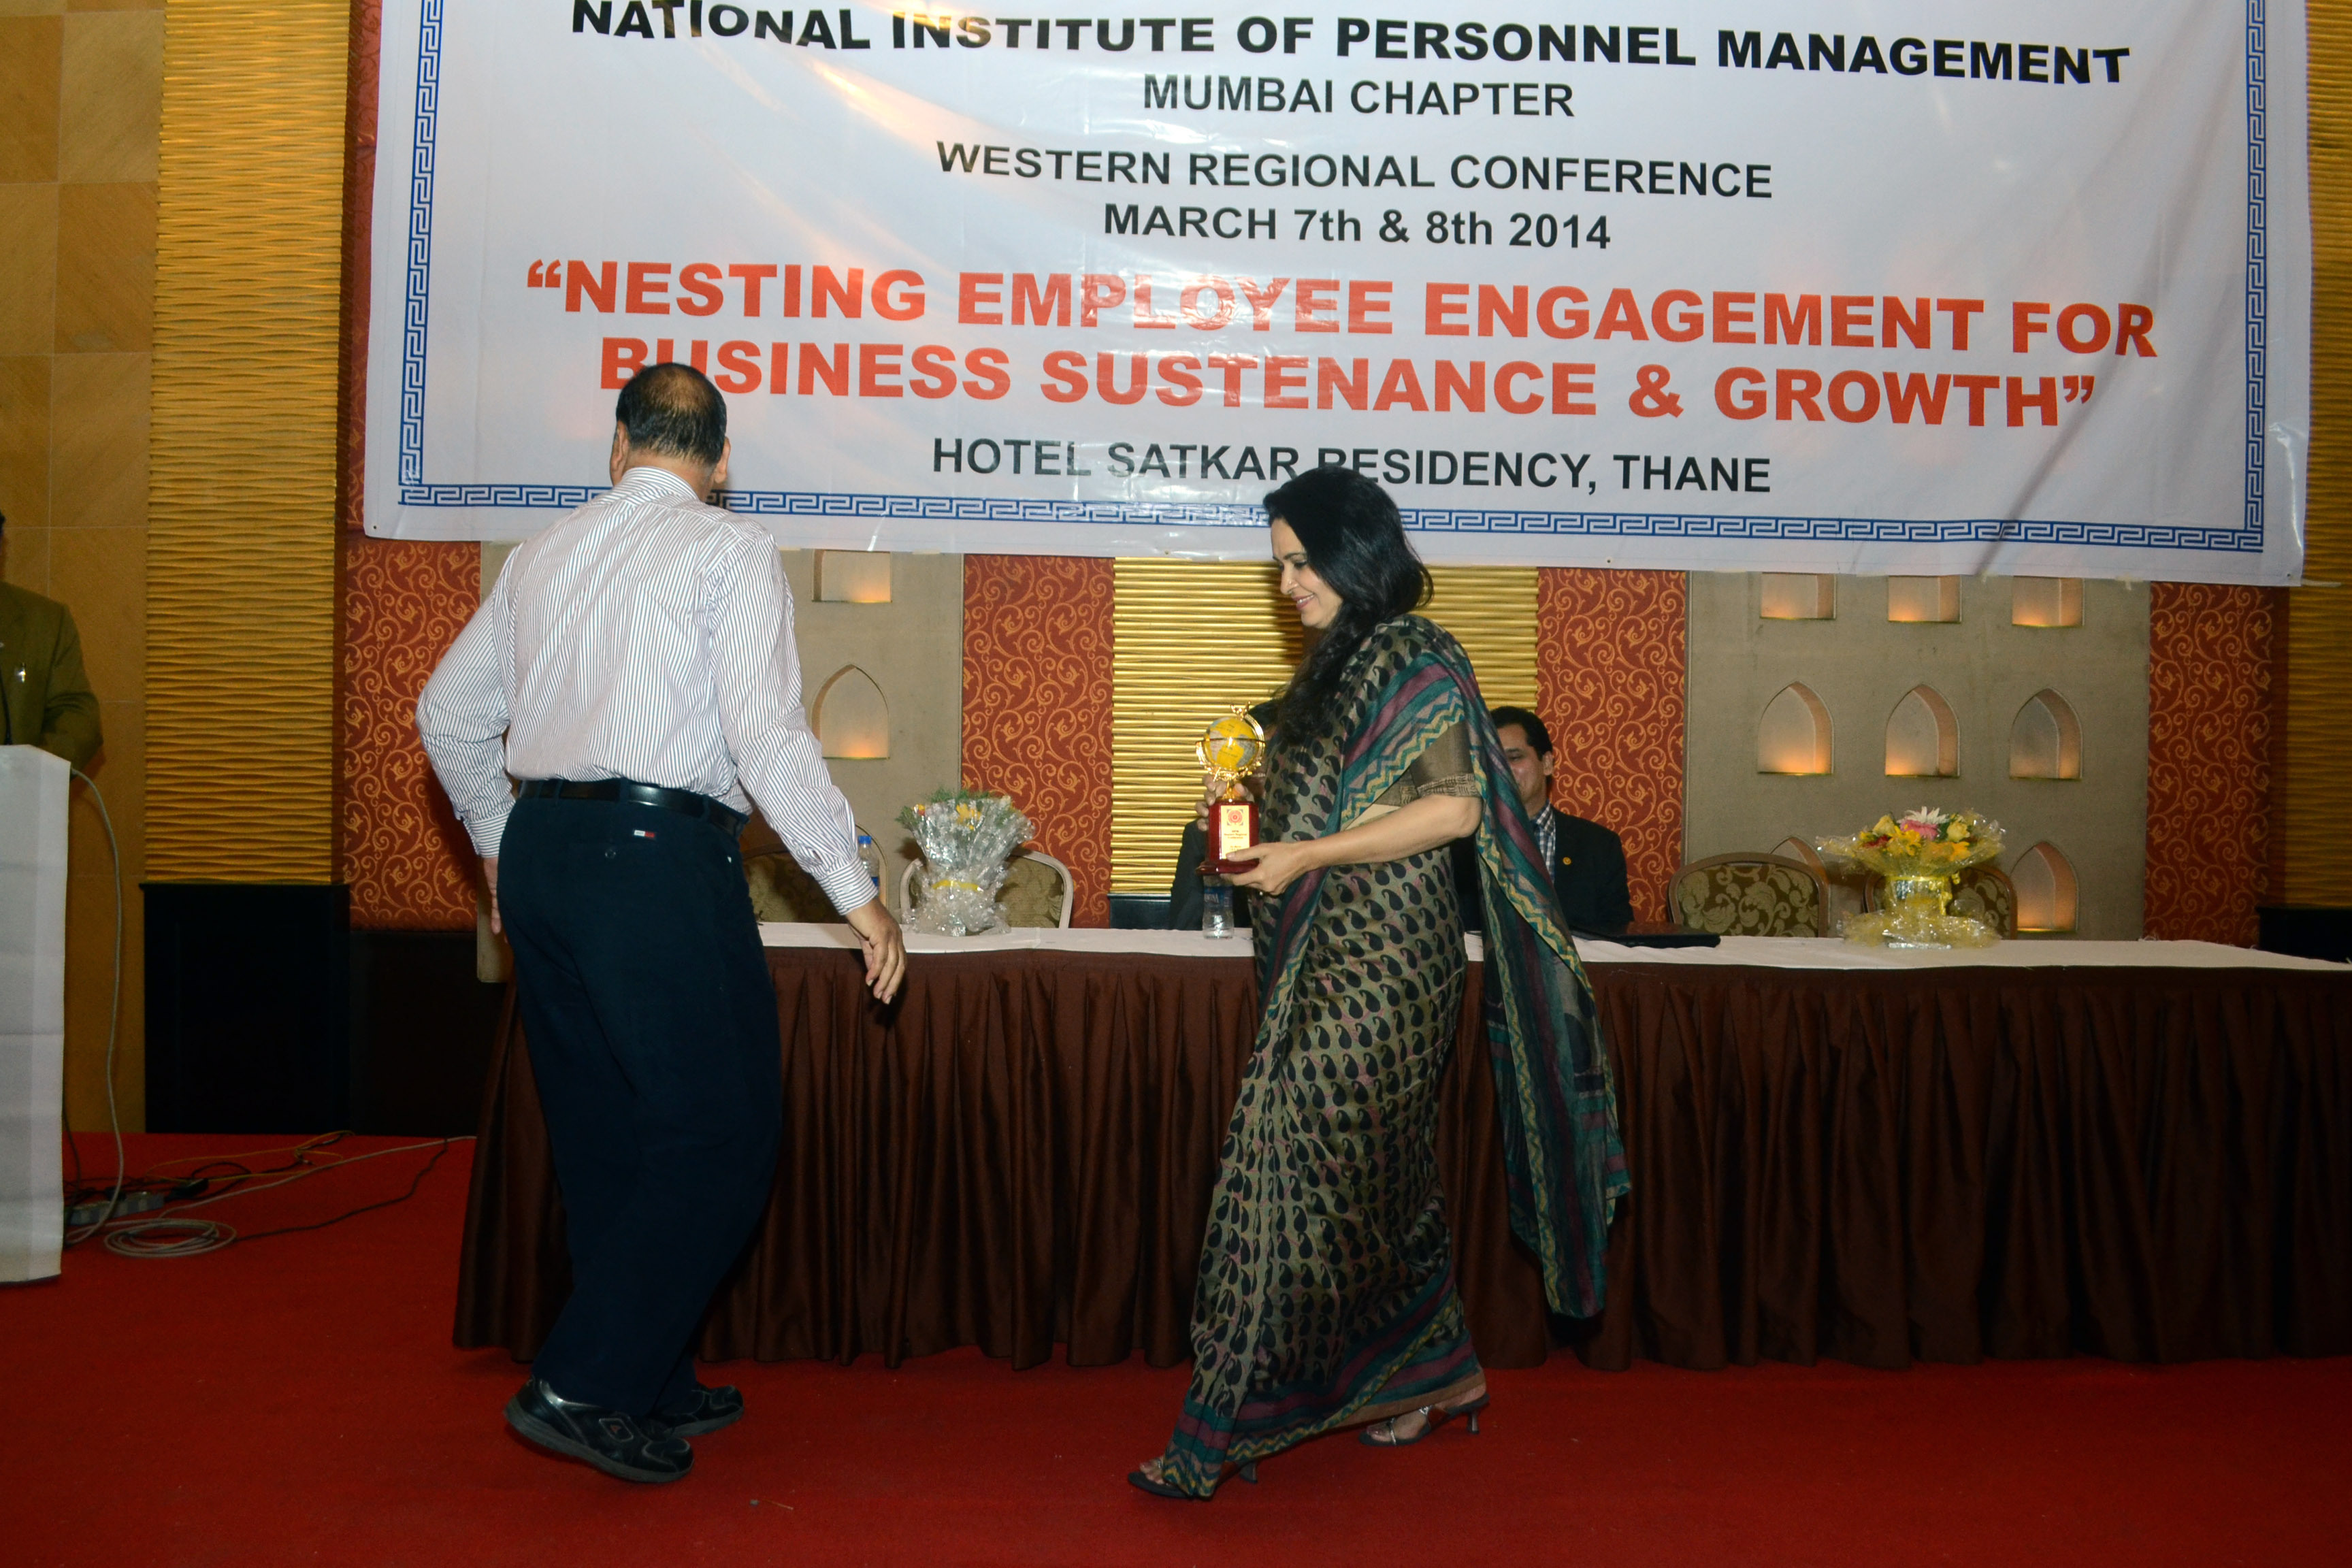 Leads the conference of Association of HR Professionals in India